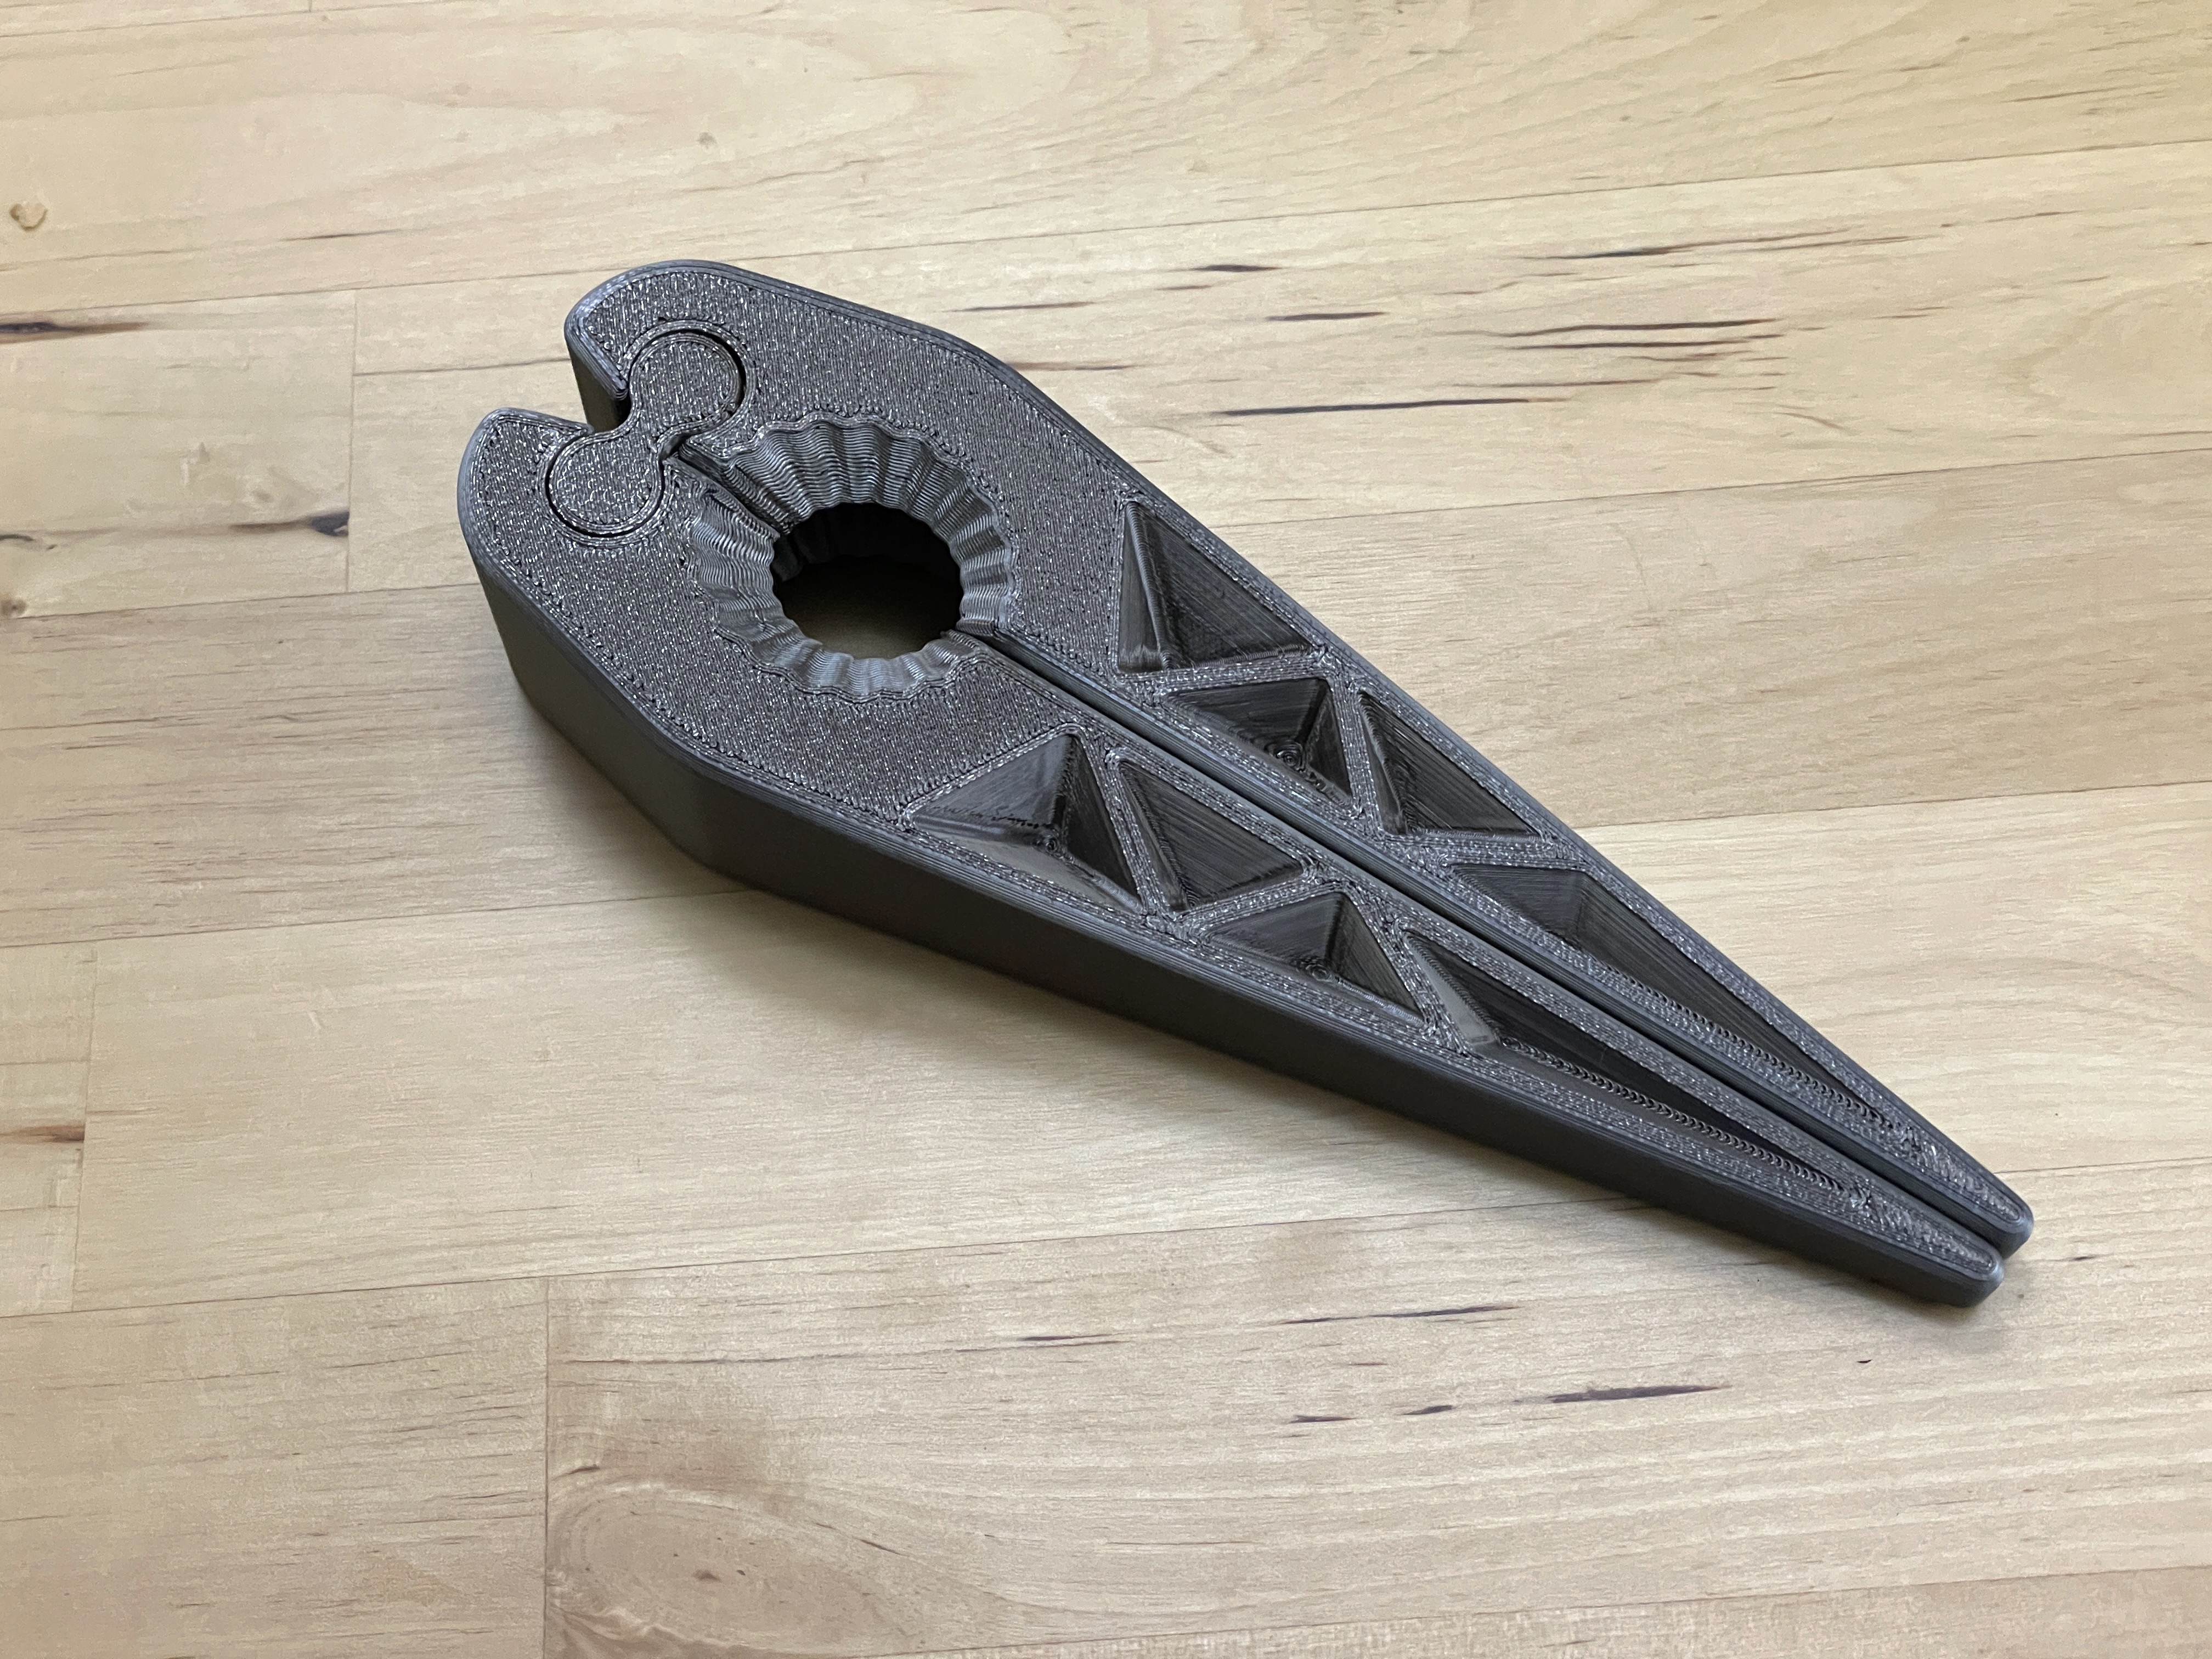 3D printed nutcracker (Print in place)